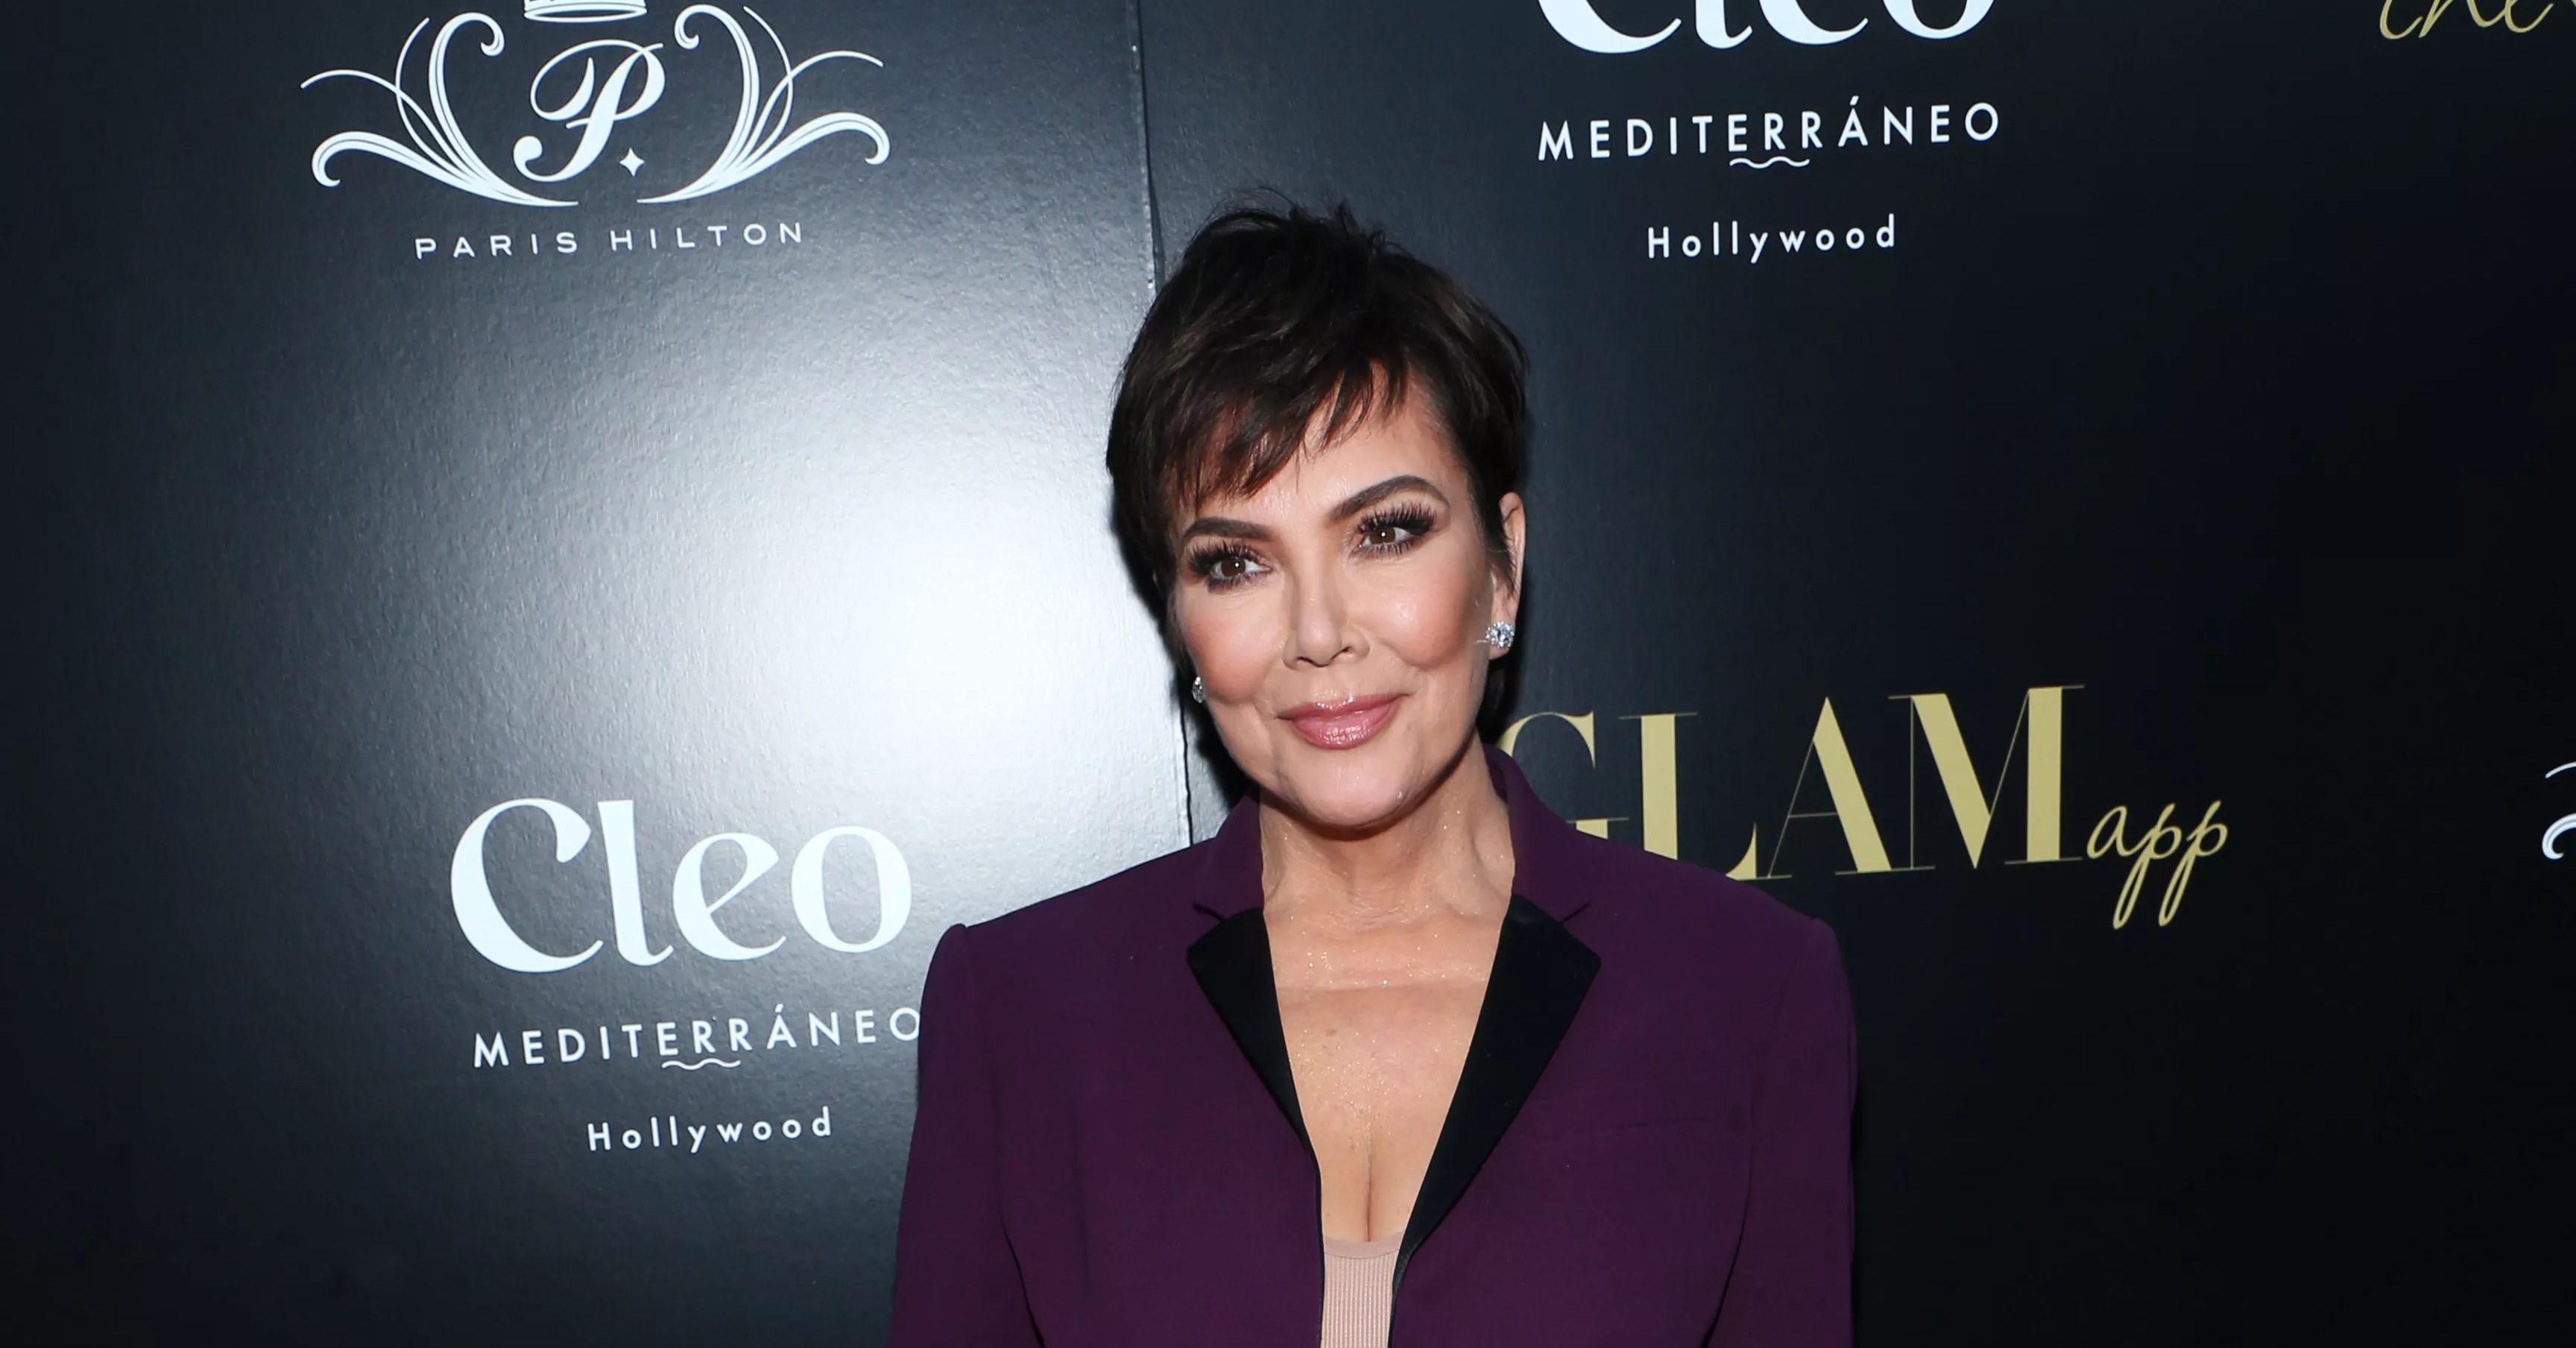 Find Out Who is Kris Jenner's Favorite Daughter: Kim Kardashian or Kylie Jenner? - The Blast